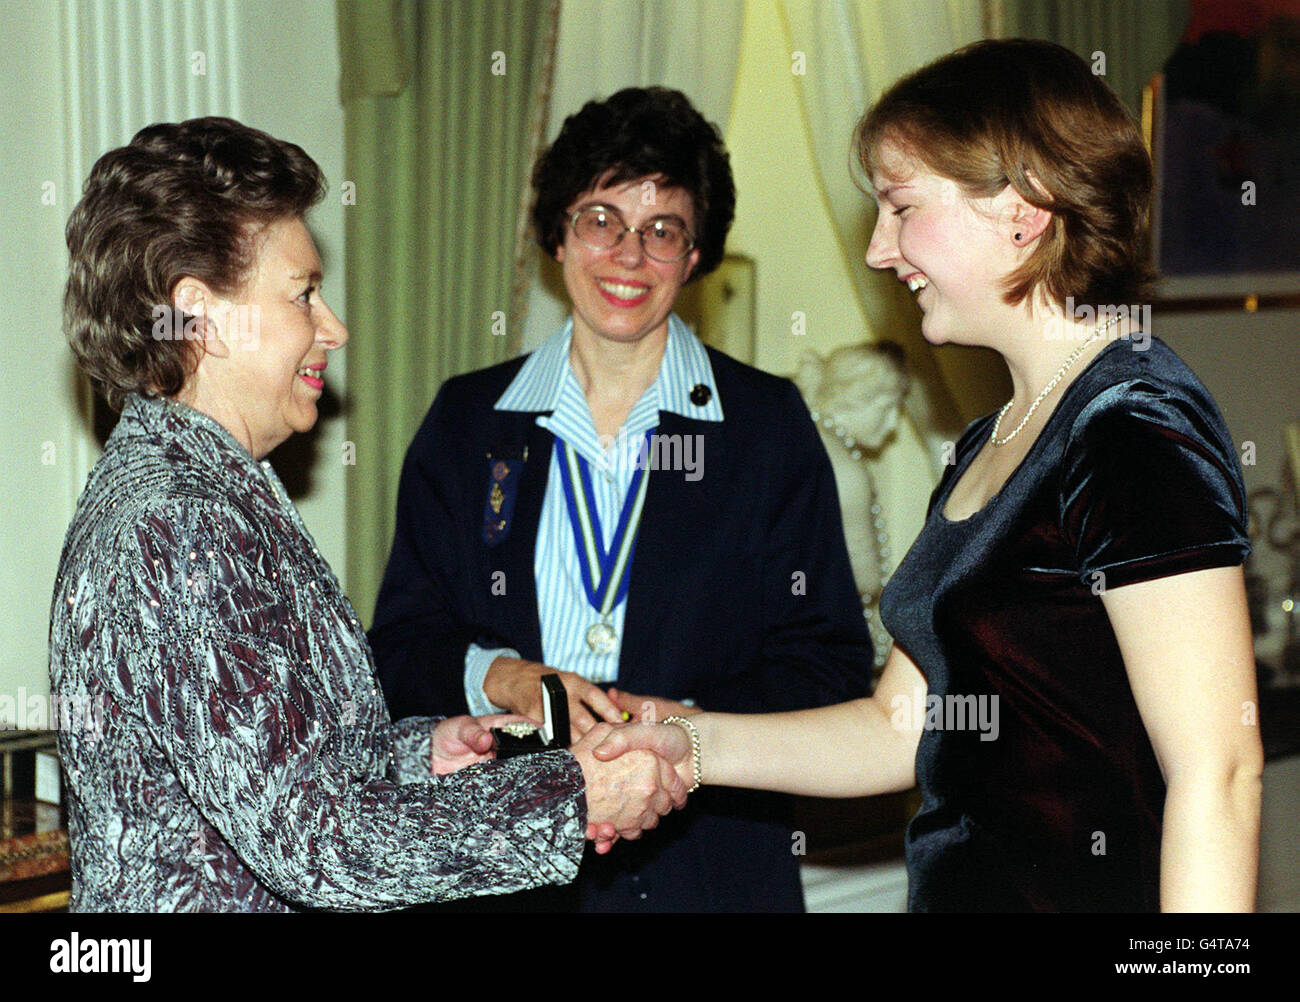 Princess Margaret, sister to Britain's Queen Elizabeth II, was visited at Kensington Palace by members of the Girl Guides Association. HRH presented a badge chosen by a group , to mark the Millennium. * Part of the revenue raised from the sale of the badges will support the Book Aid Service project, benefiting child literacy in Africa. (l/r) Princess Margaret, Bridget Towle, Chief Guide, Naomi Giddings, from Royston, Anglia. Stock Photo